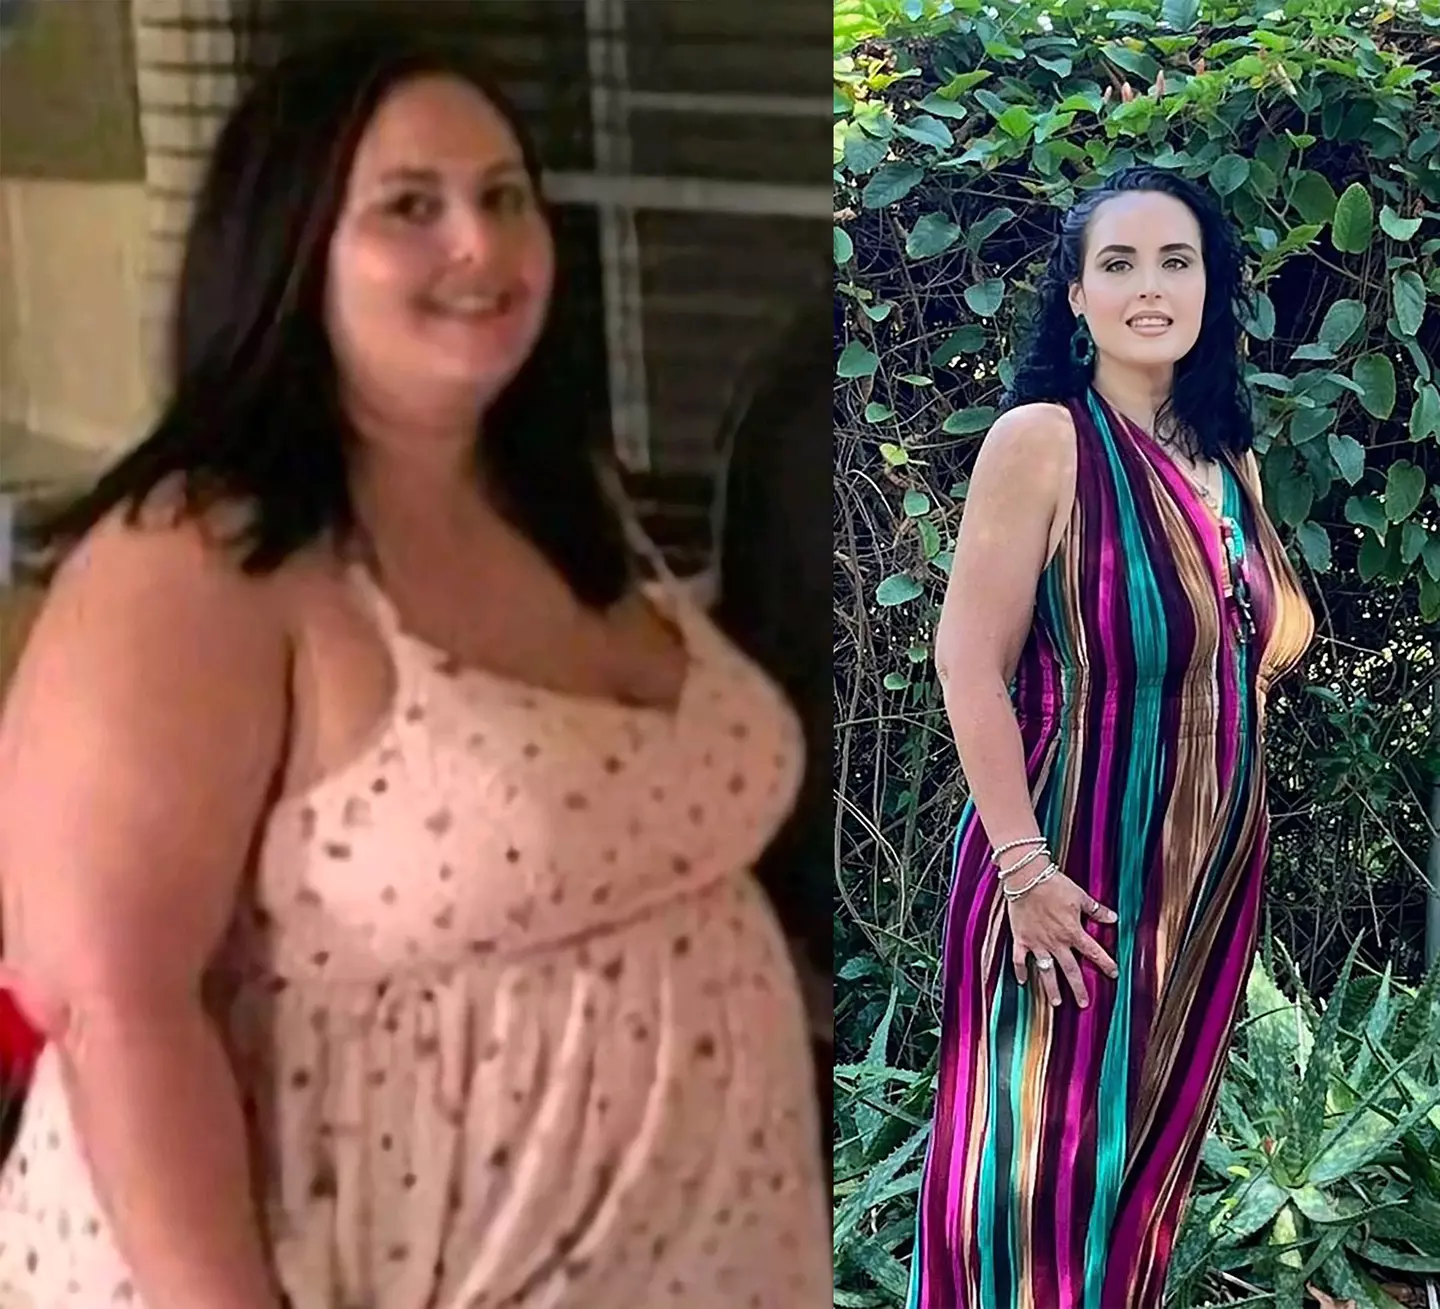 Jessey Bowers is pictured before and after weight loss surgery.